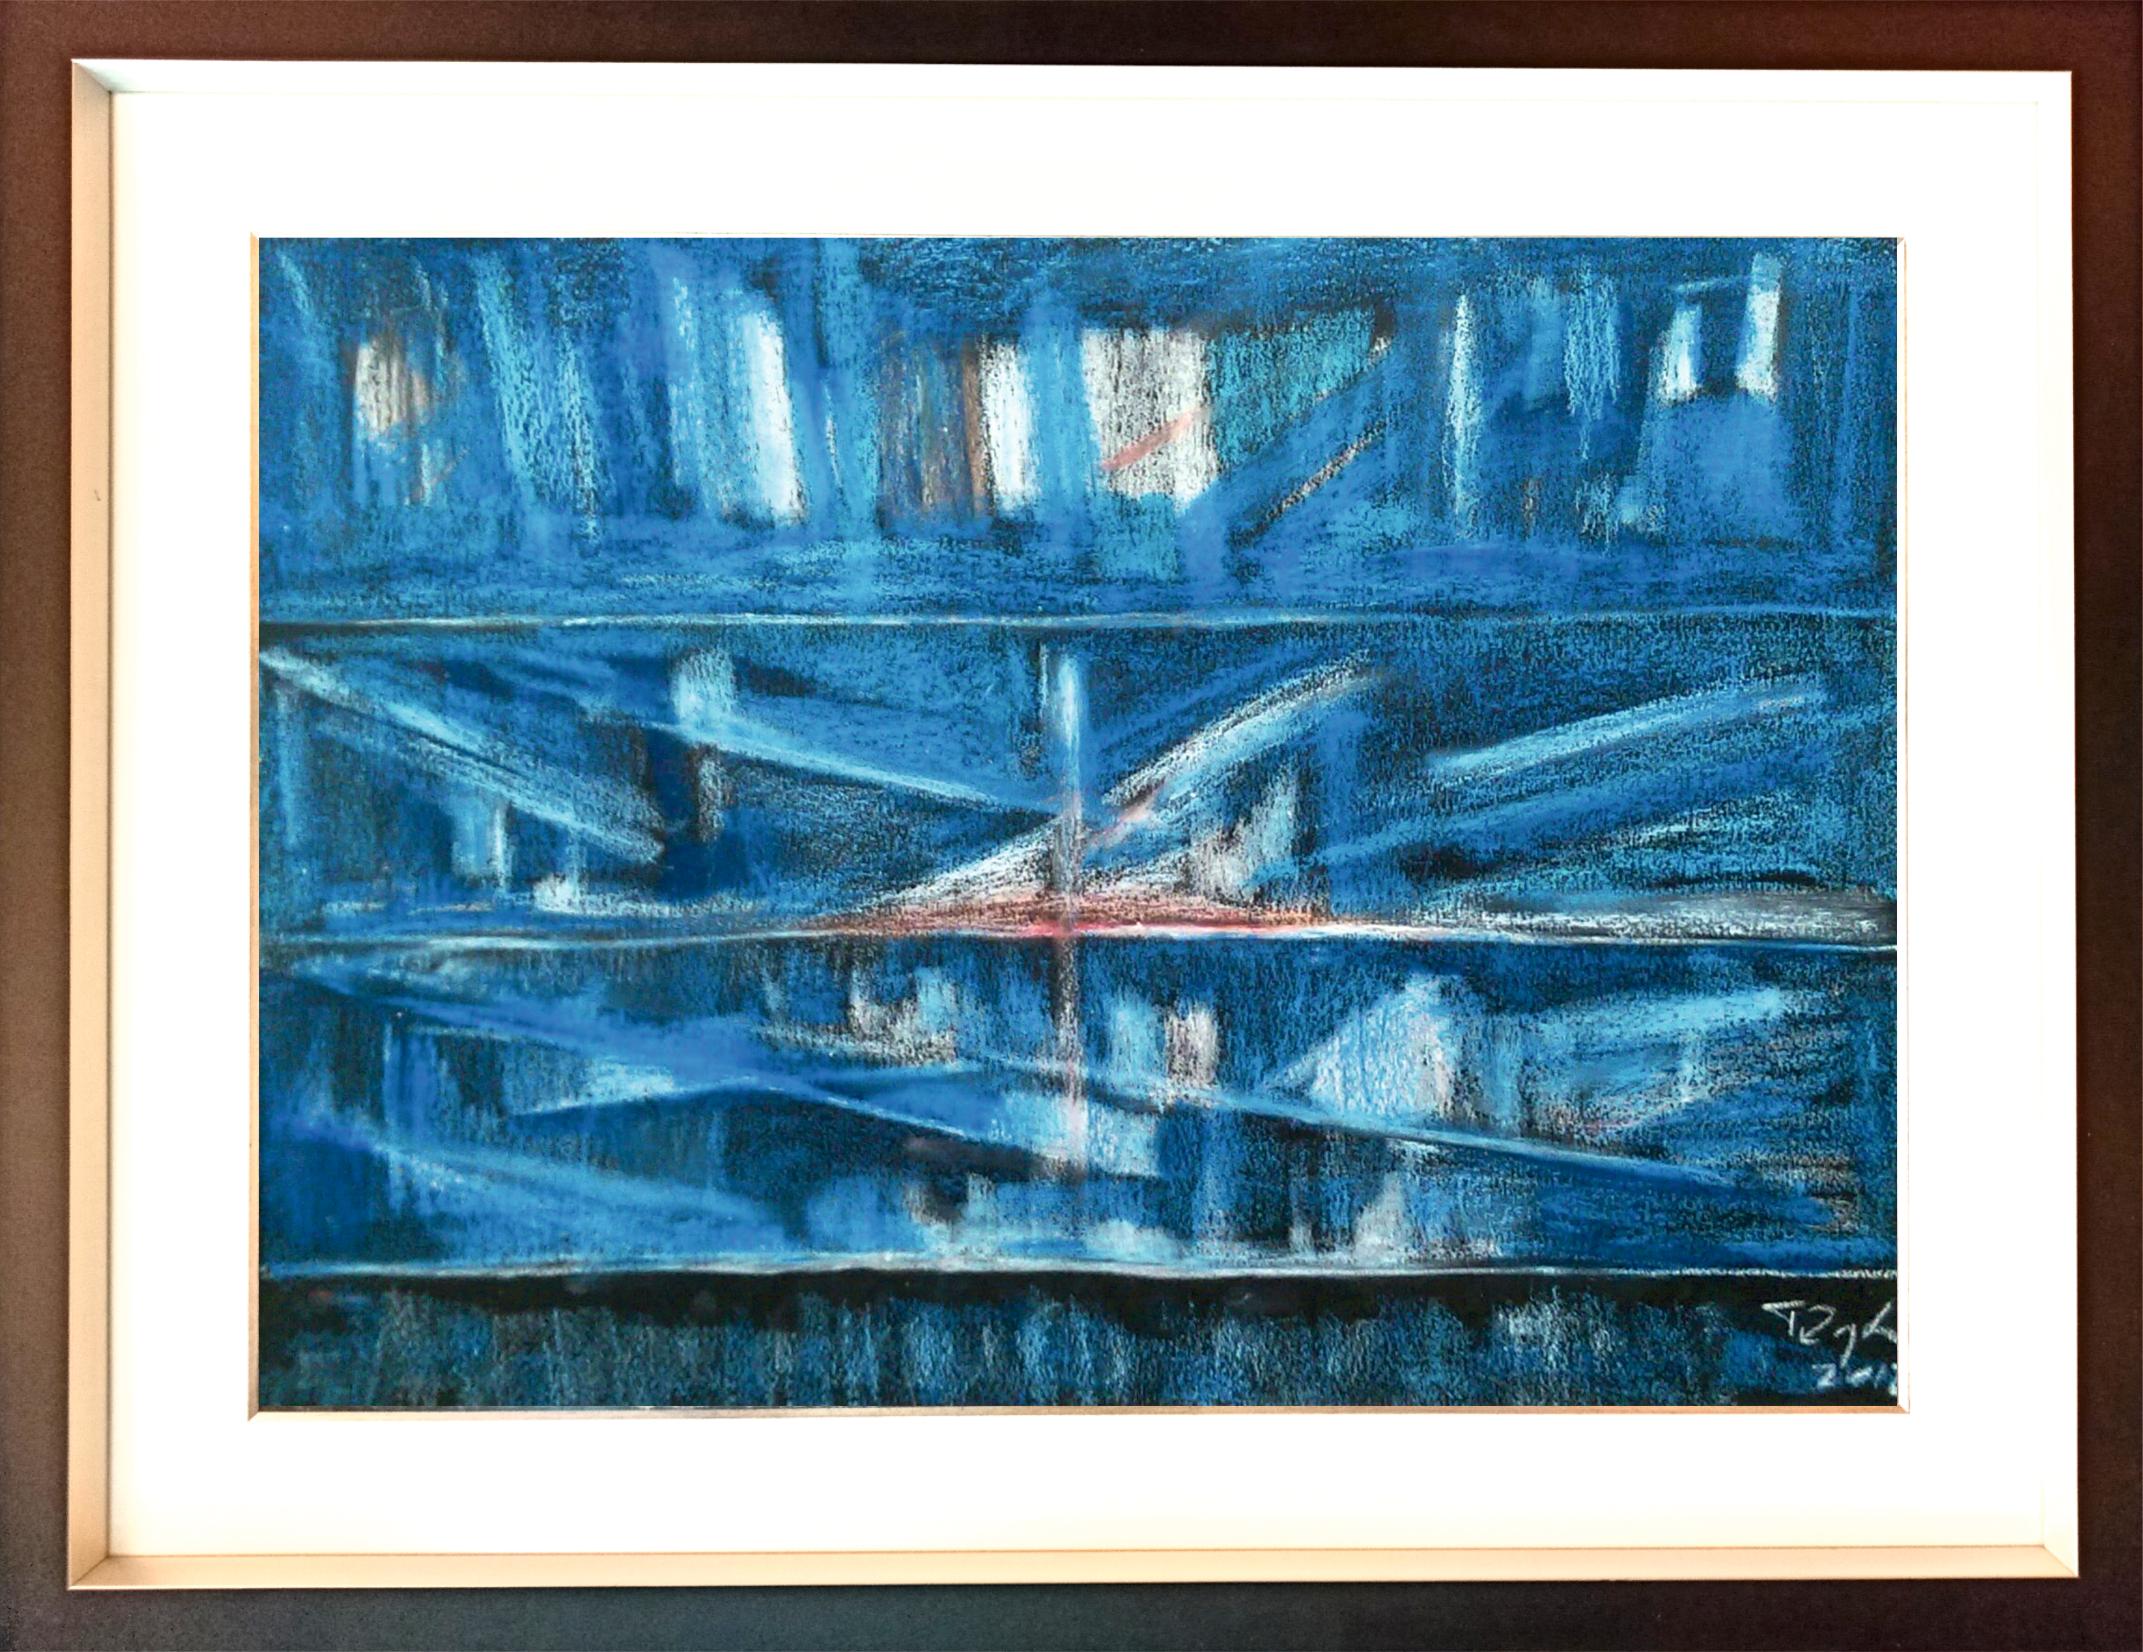 Blue levels / Oil pastel / 50 x 70 cm. One of the author's first oil pastel paintings. Framed in Passe-Partout and a beautiful blue lacquered wooden frame.
Catalog Number P0005. The picture is ready to hang. Signed on the front.
The painting is